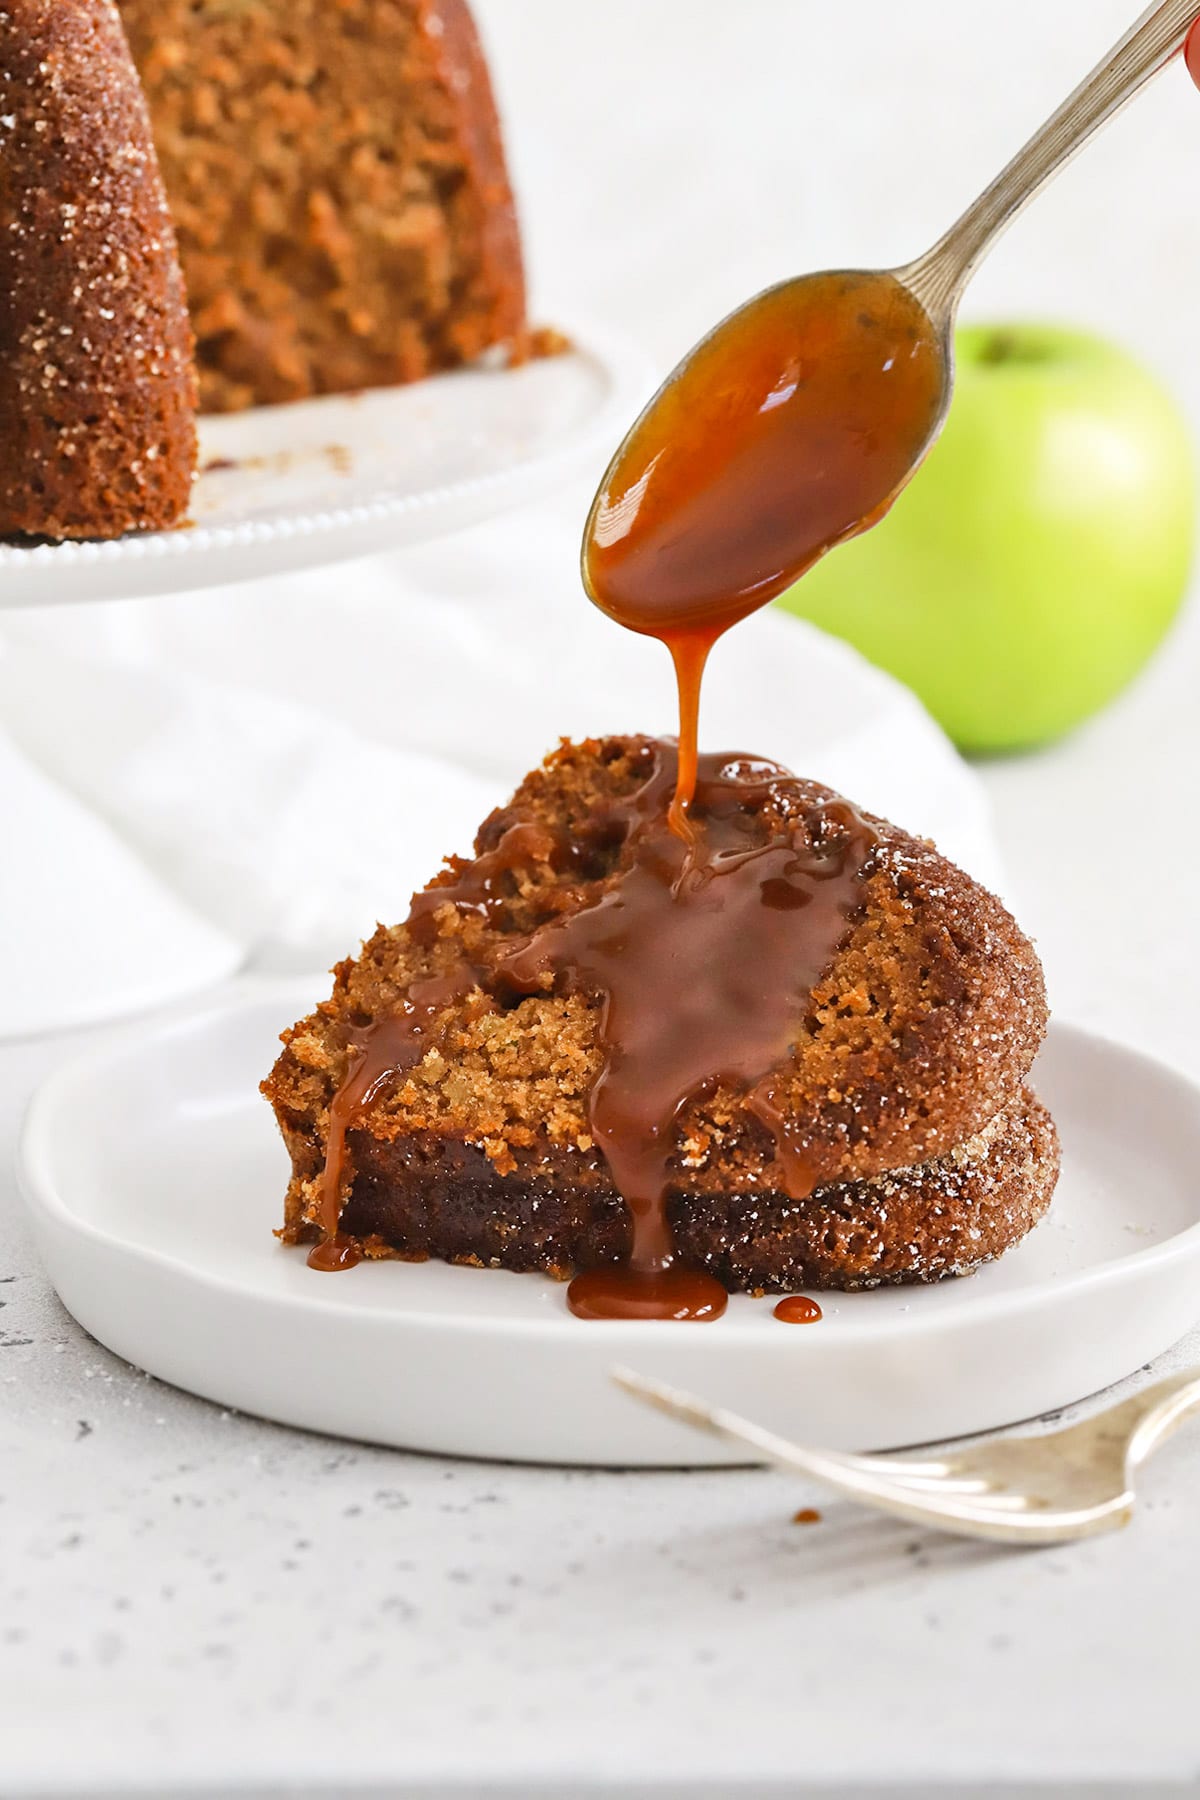 A slice of gluten-free apple spice bundt cake being drizzled with caramel sauce